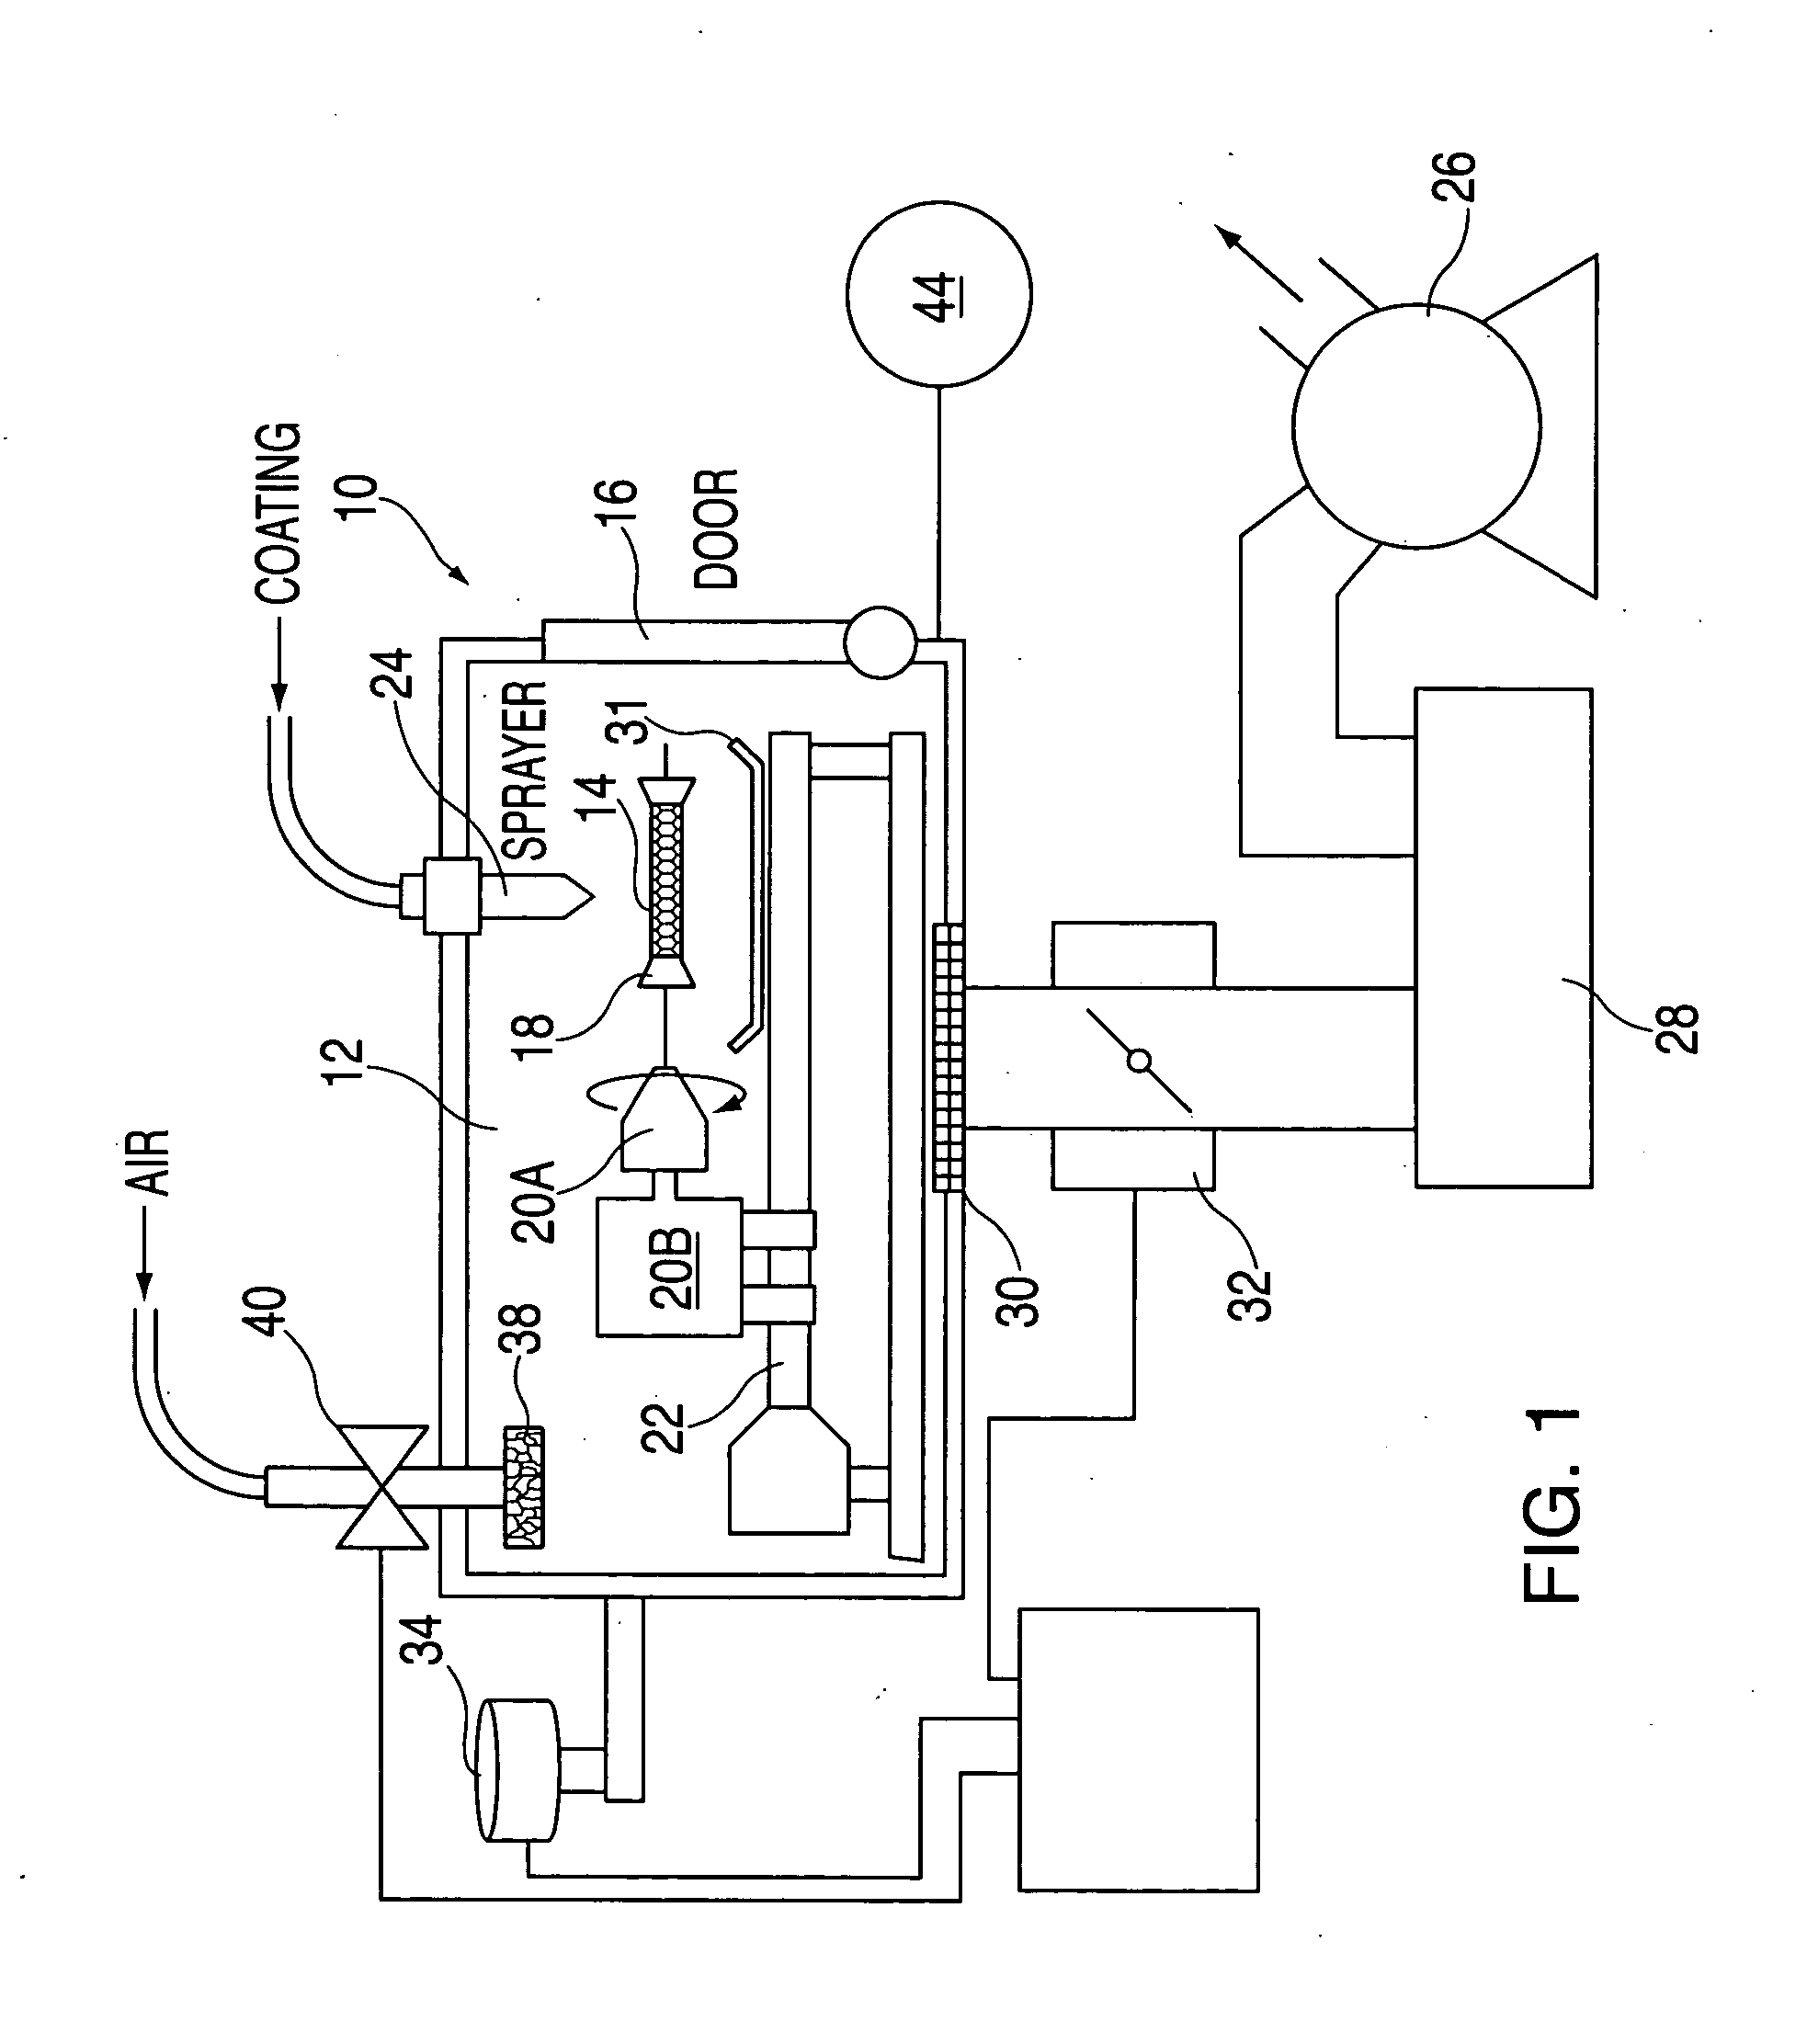 Apparatus and method for coating implantable devices